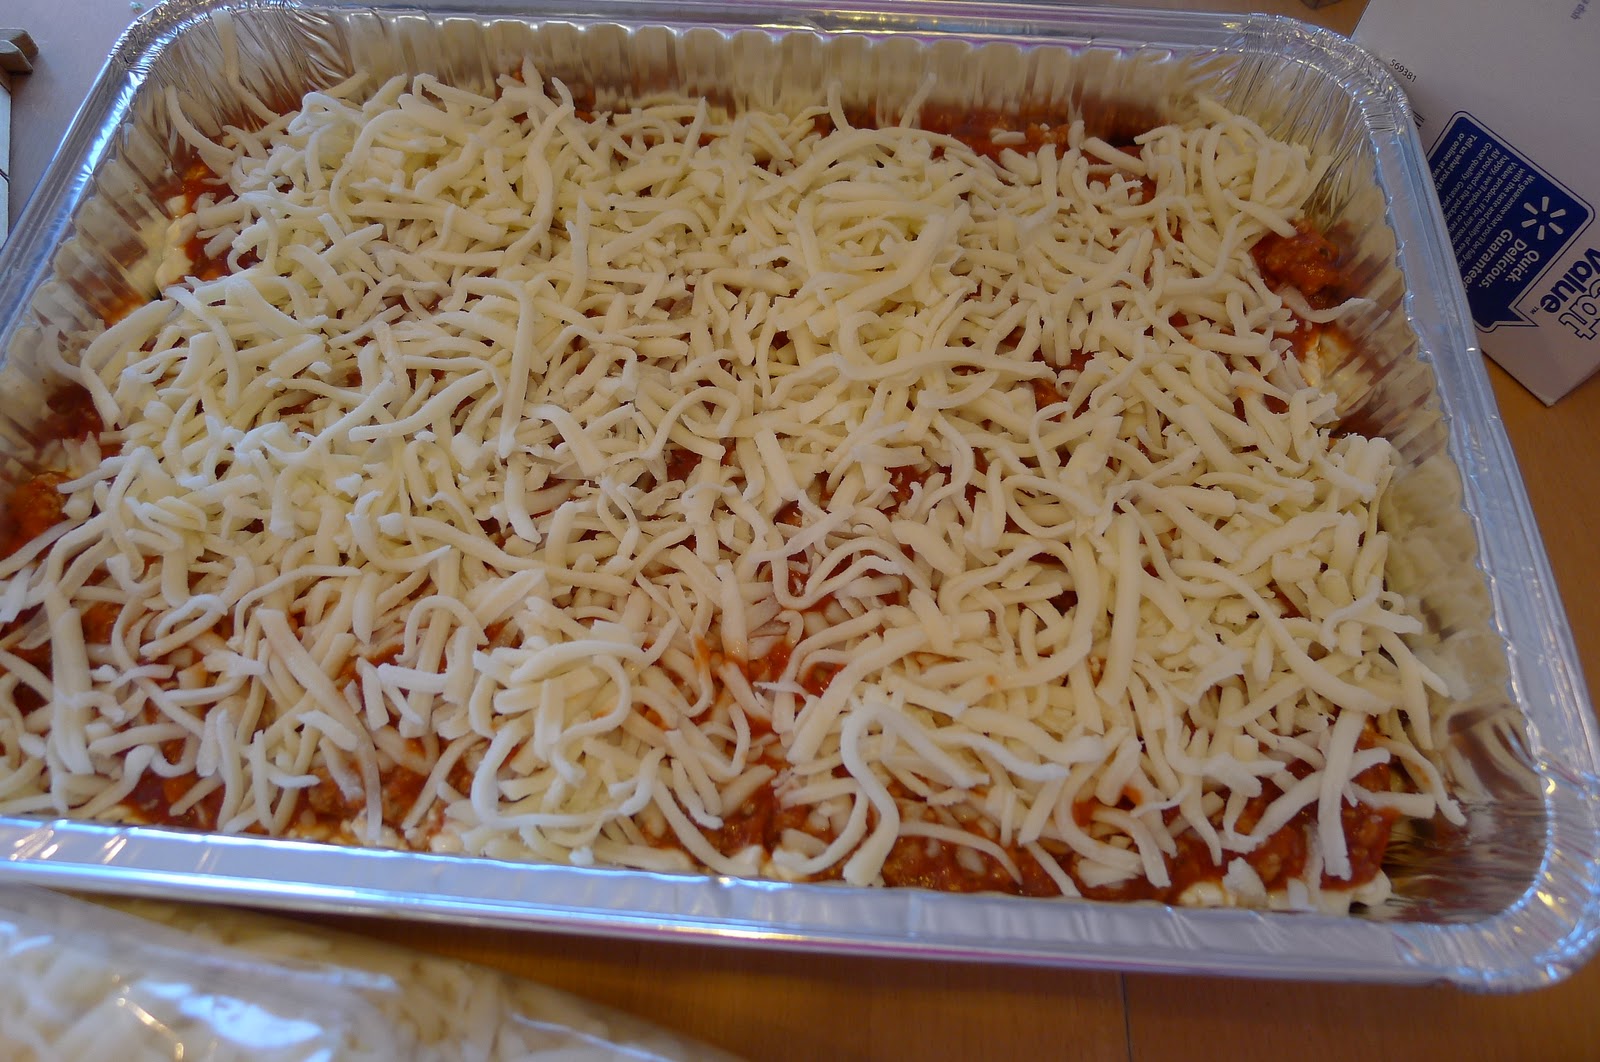 Pieces by Polly: Easiest Lasagna Ever - Great Neighbor Gift or for Yourself